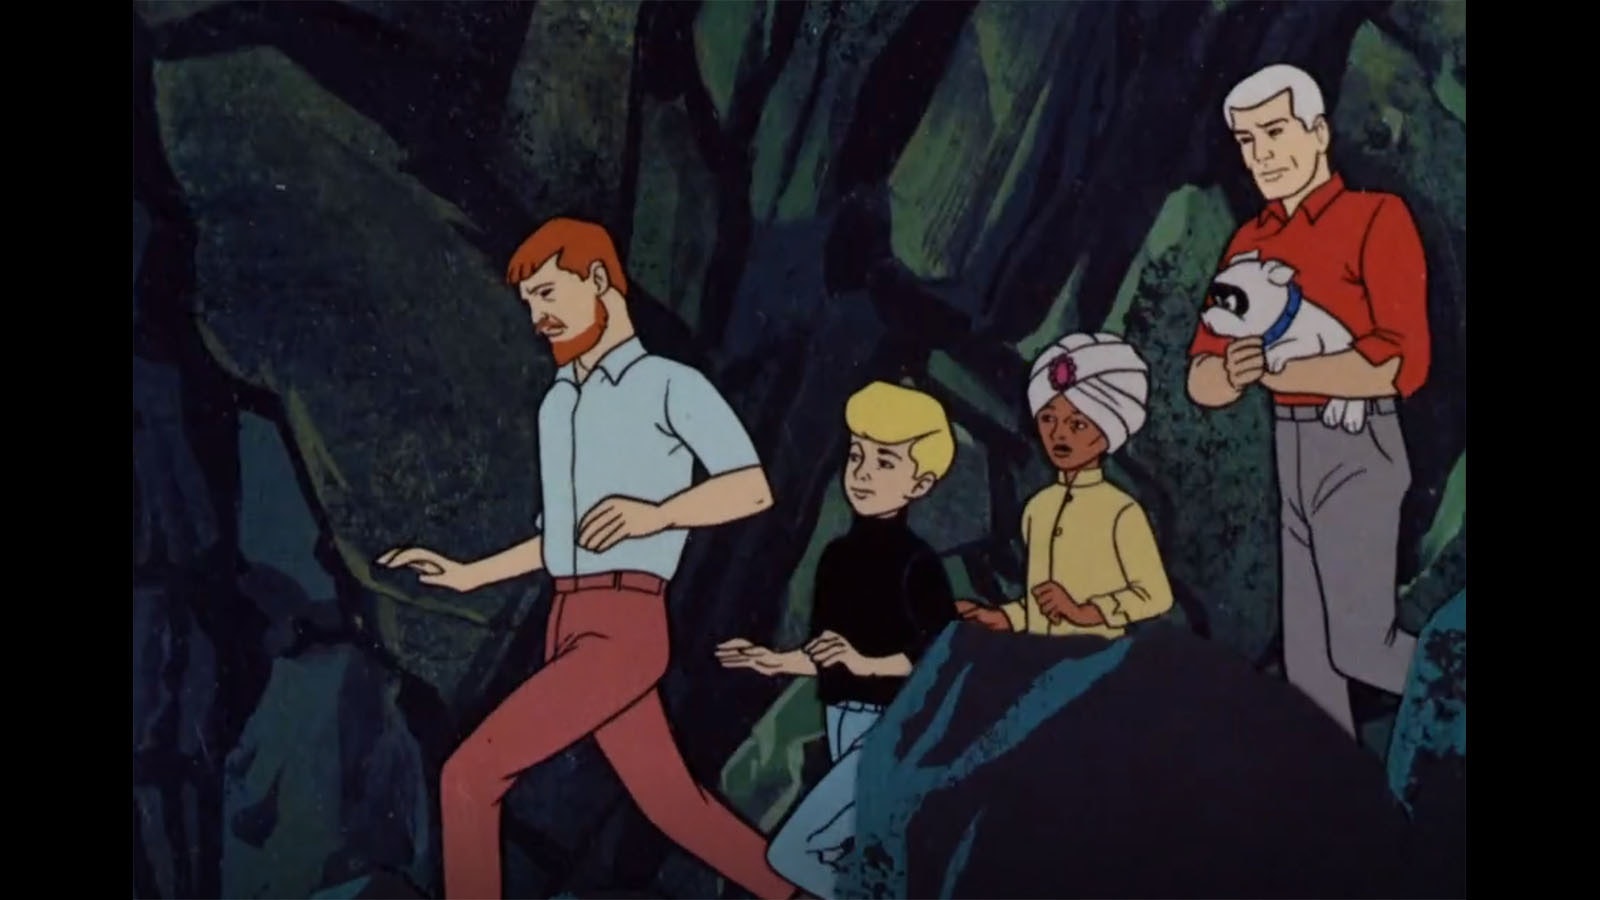 From Episode 21 of "Jonny Quest," "The Devil's Tower."